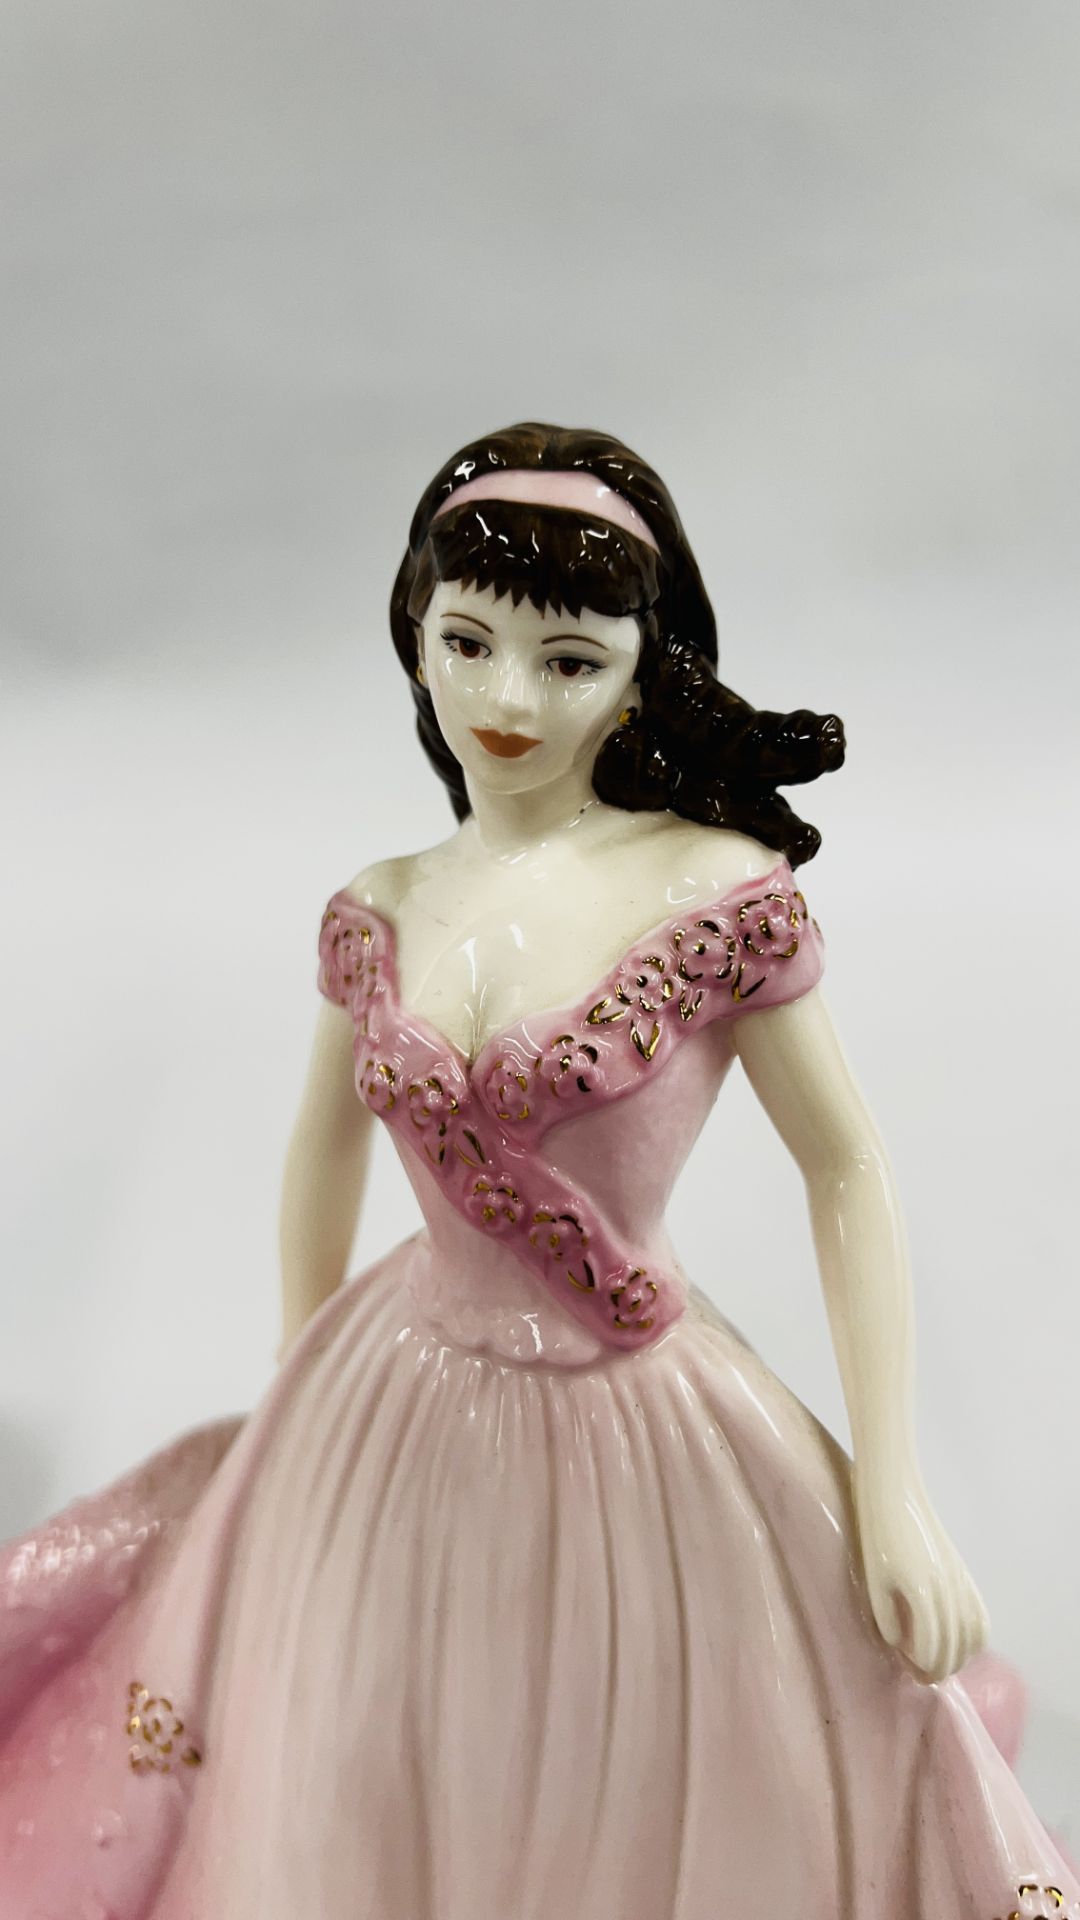 3 COALPORT CABINET COLLECTORS FIGURES TO INCLUDE CLASSIC ELEGANCE "OLIVIA" LIMITED EDITION 1316/7, - Image 3 of 12